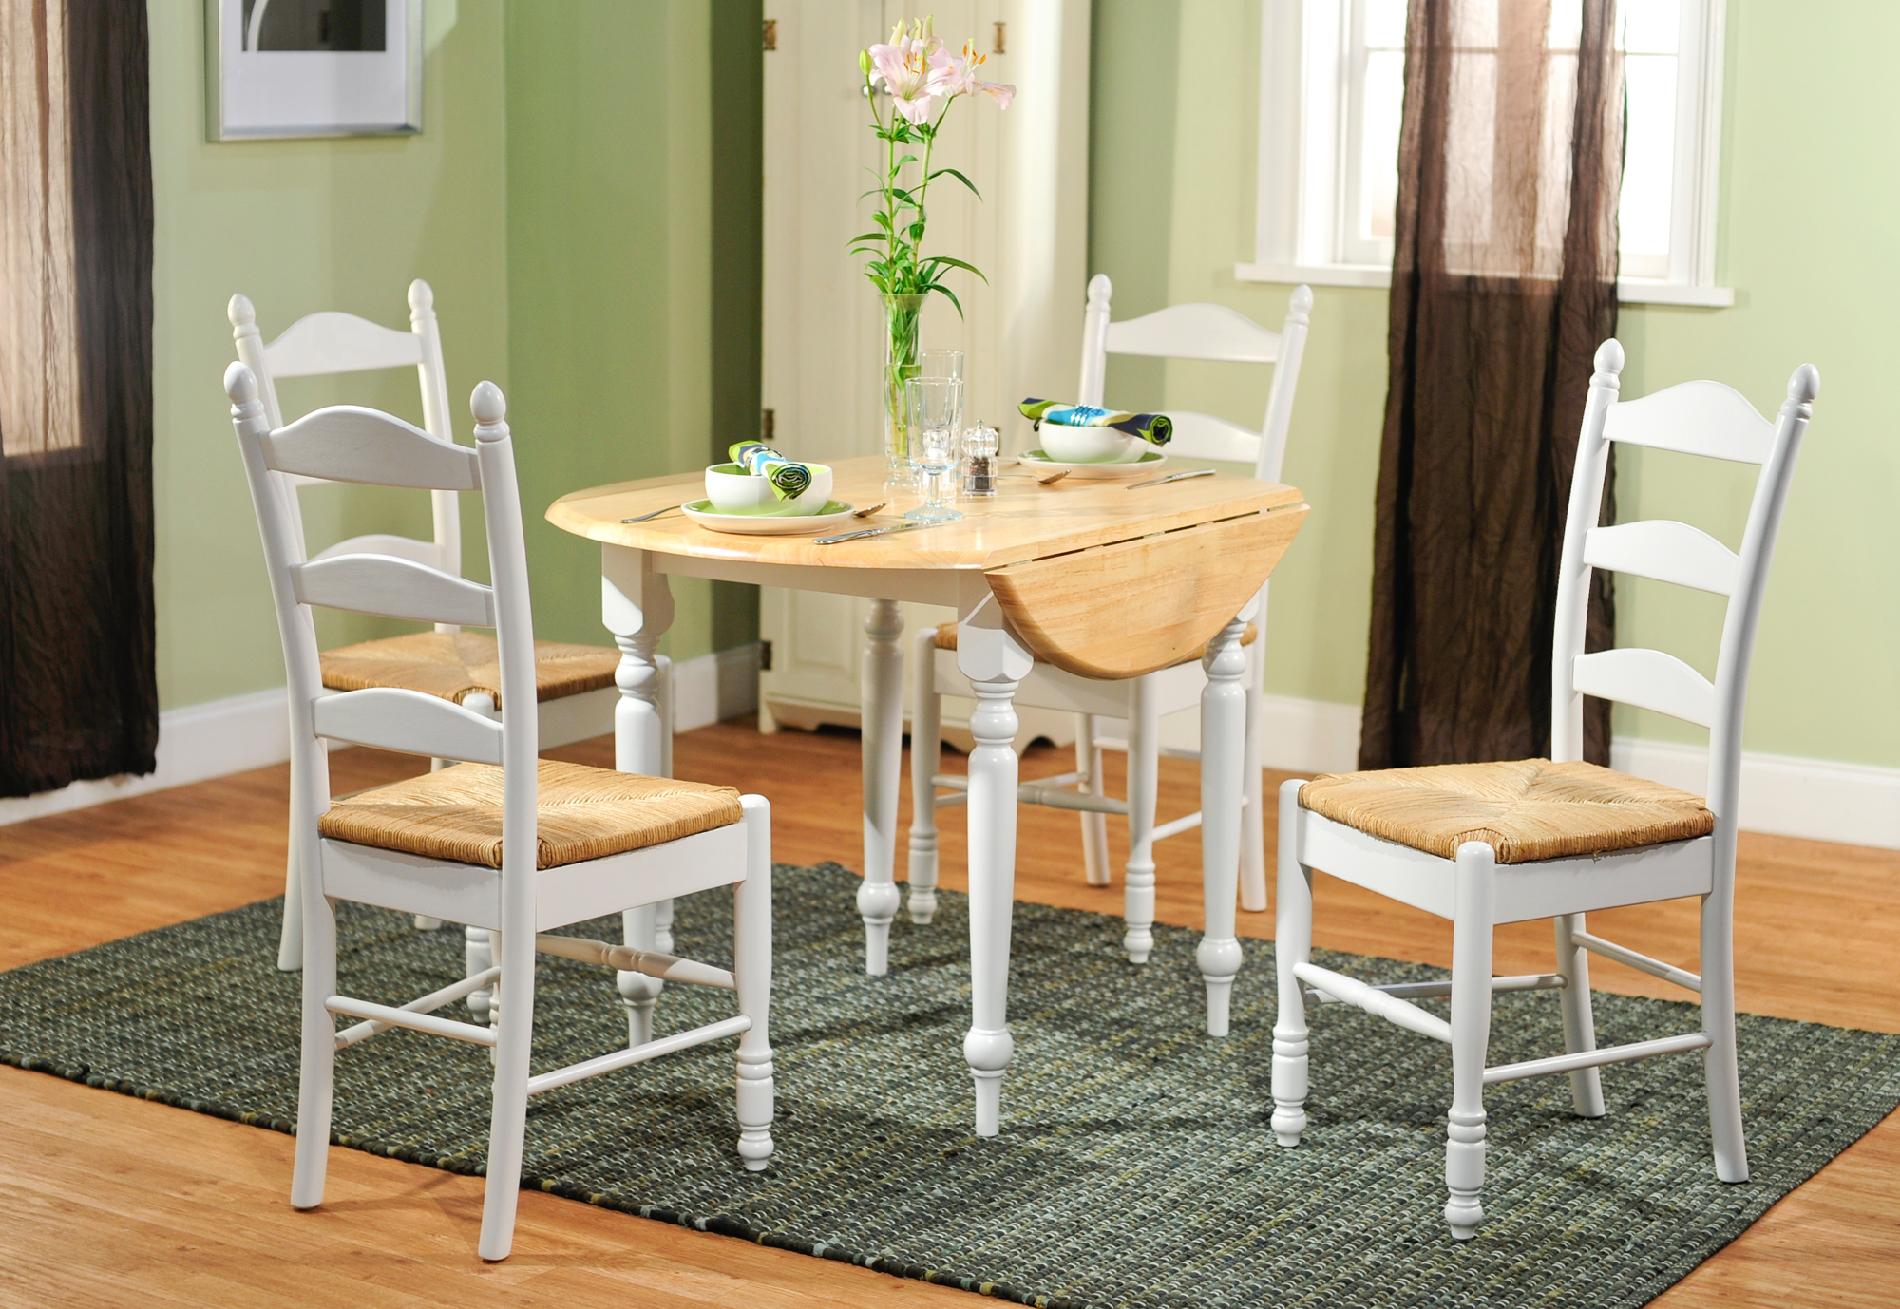 5pc Ladderback dining set in white and natural